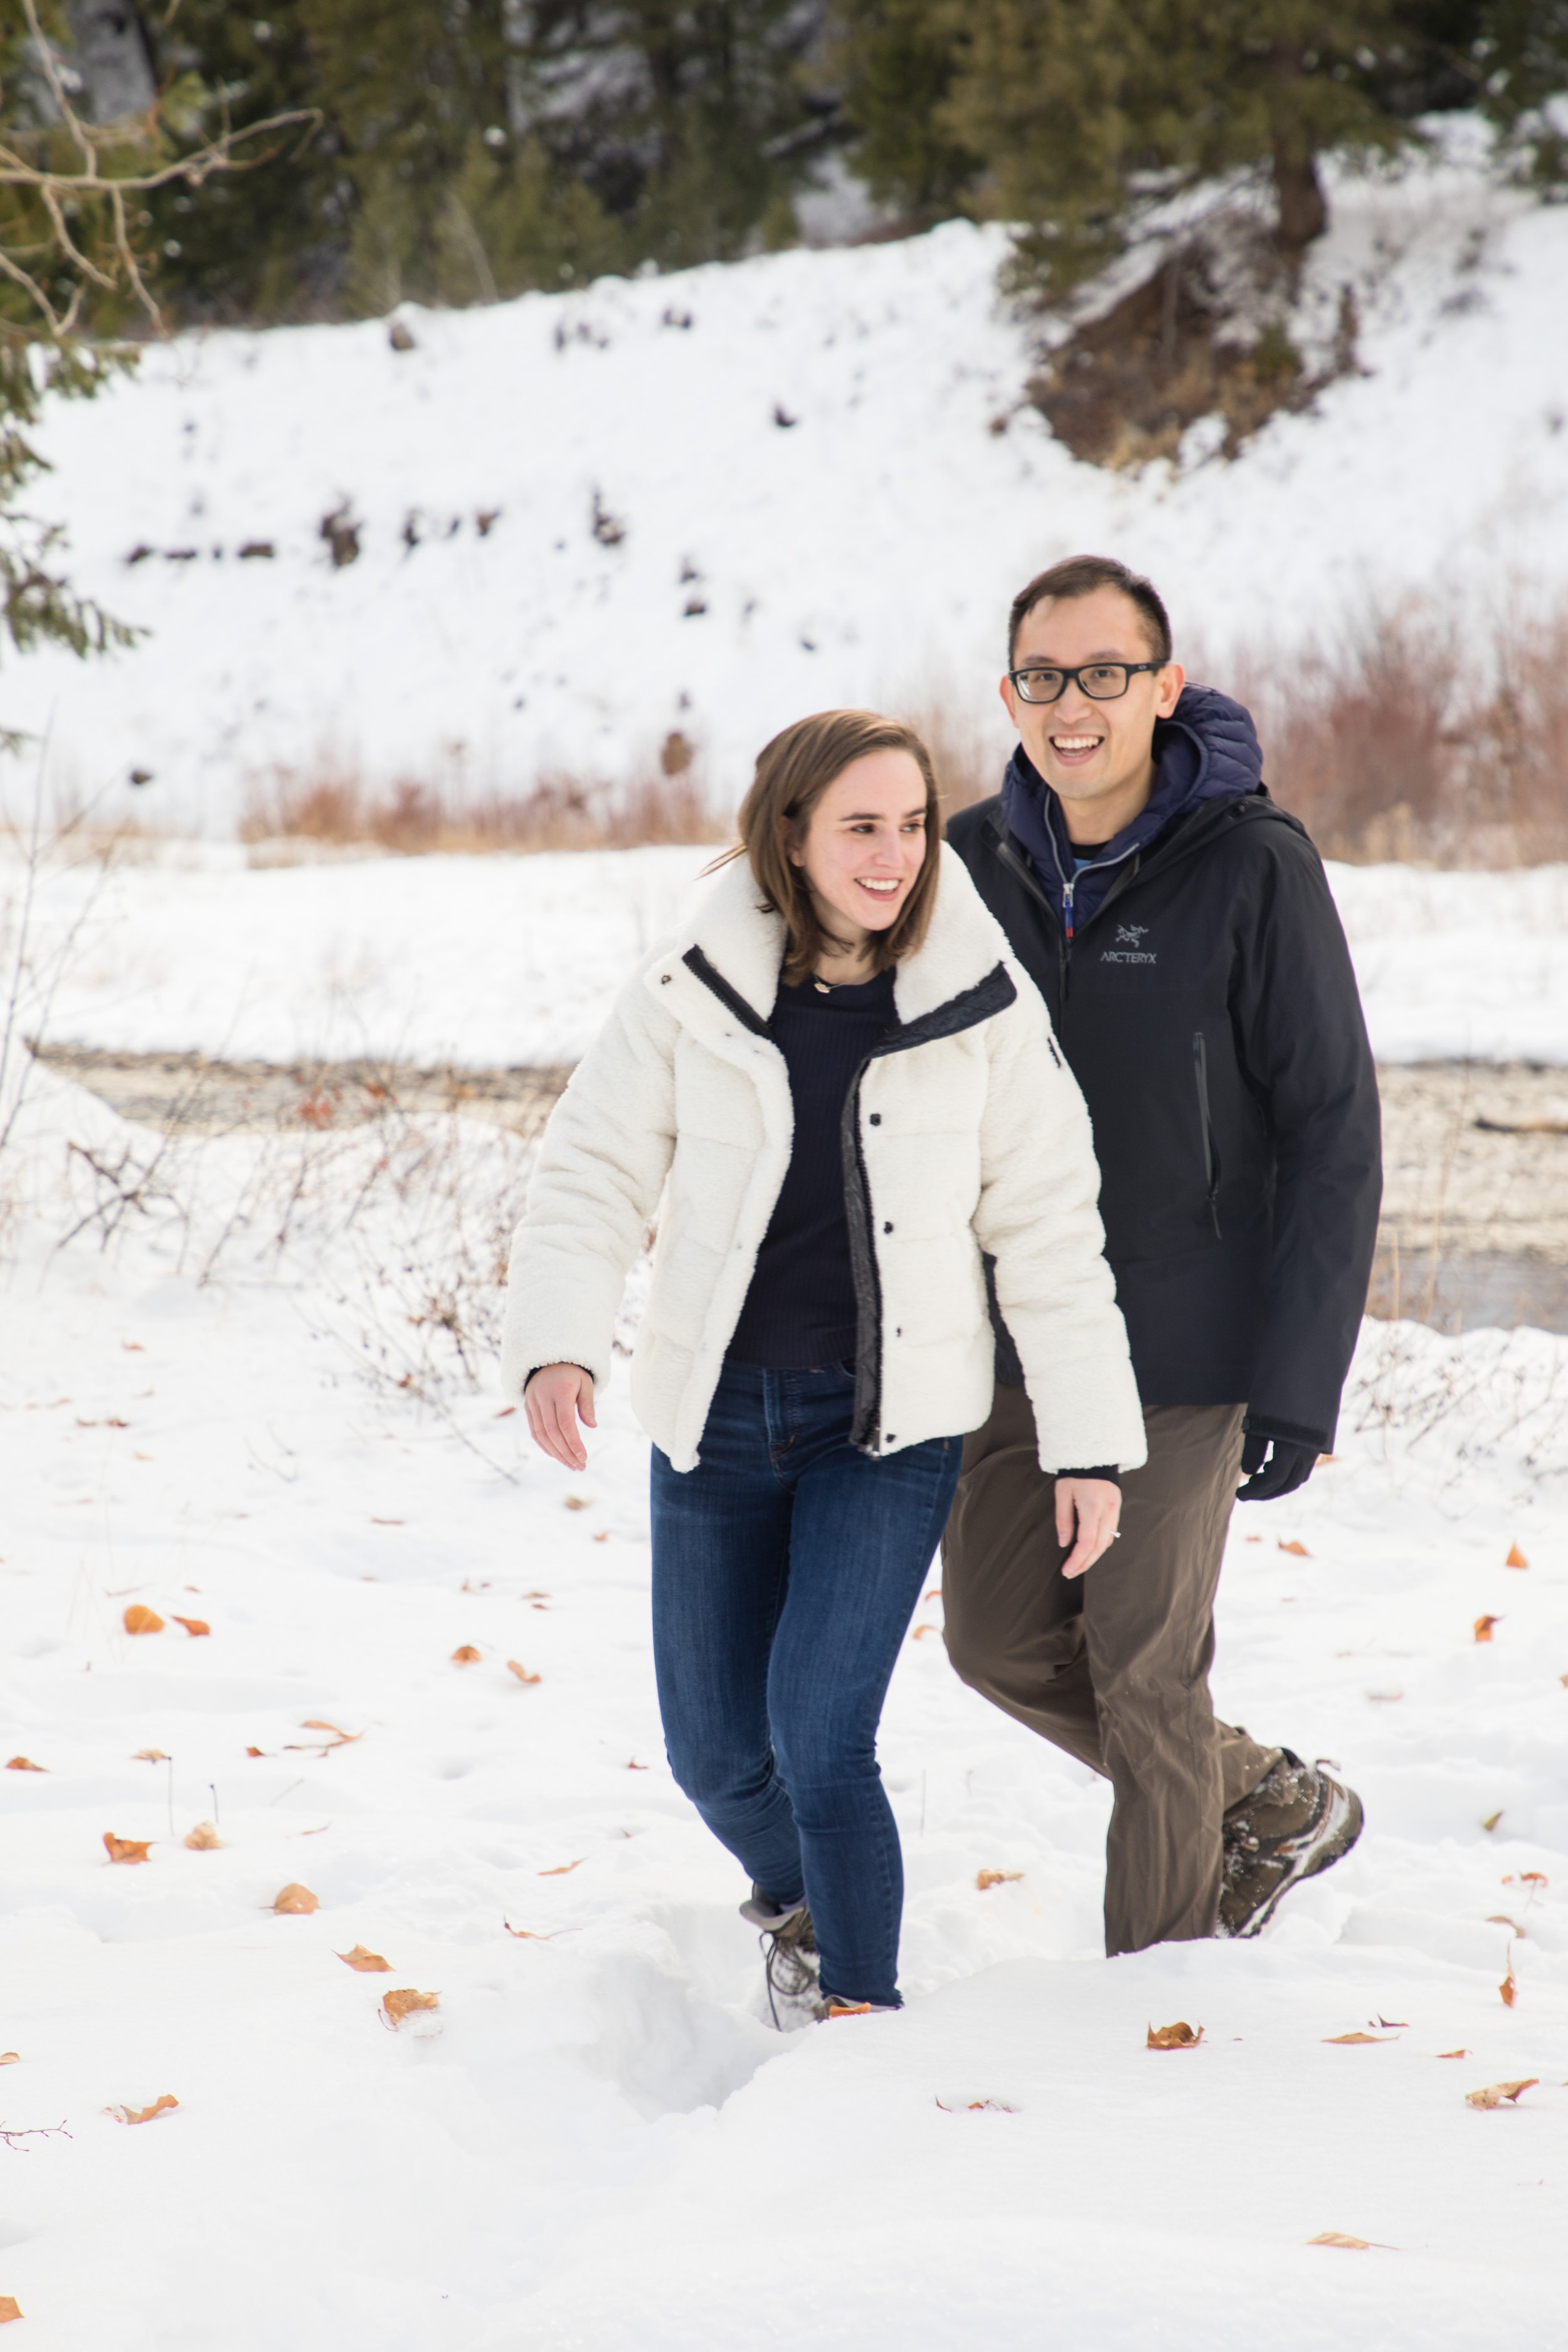 Nate and Hailey’s winter proposal in Ketchum, Idaho